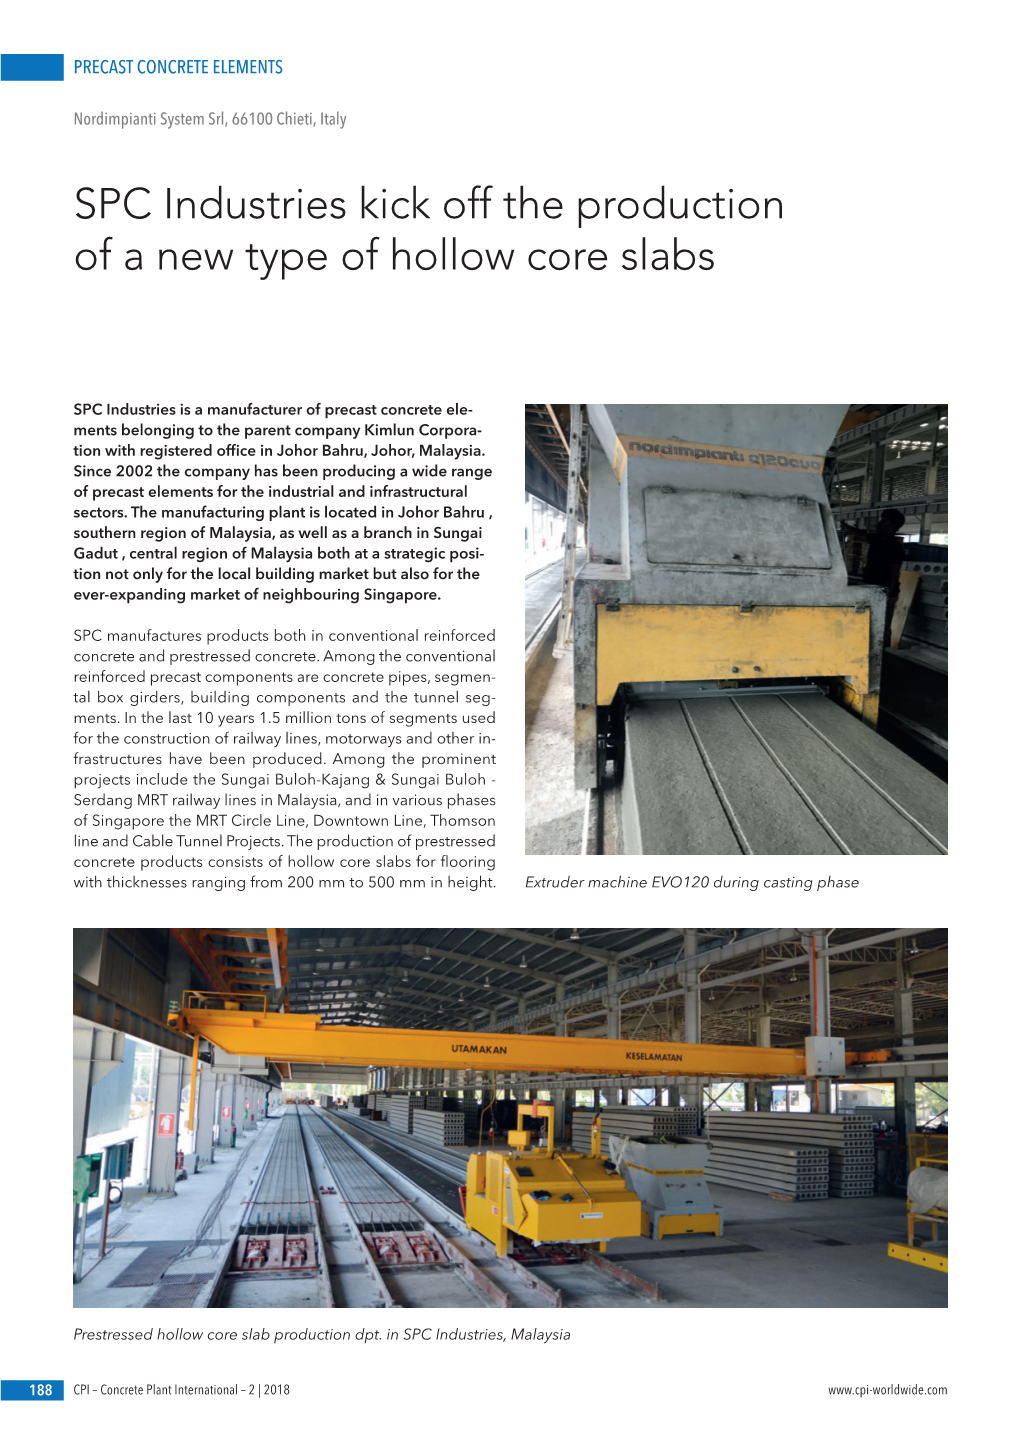 SPC Industries Kick Off the Production of a New Type of Hollow Core Slabs